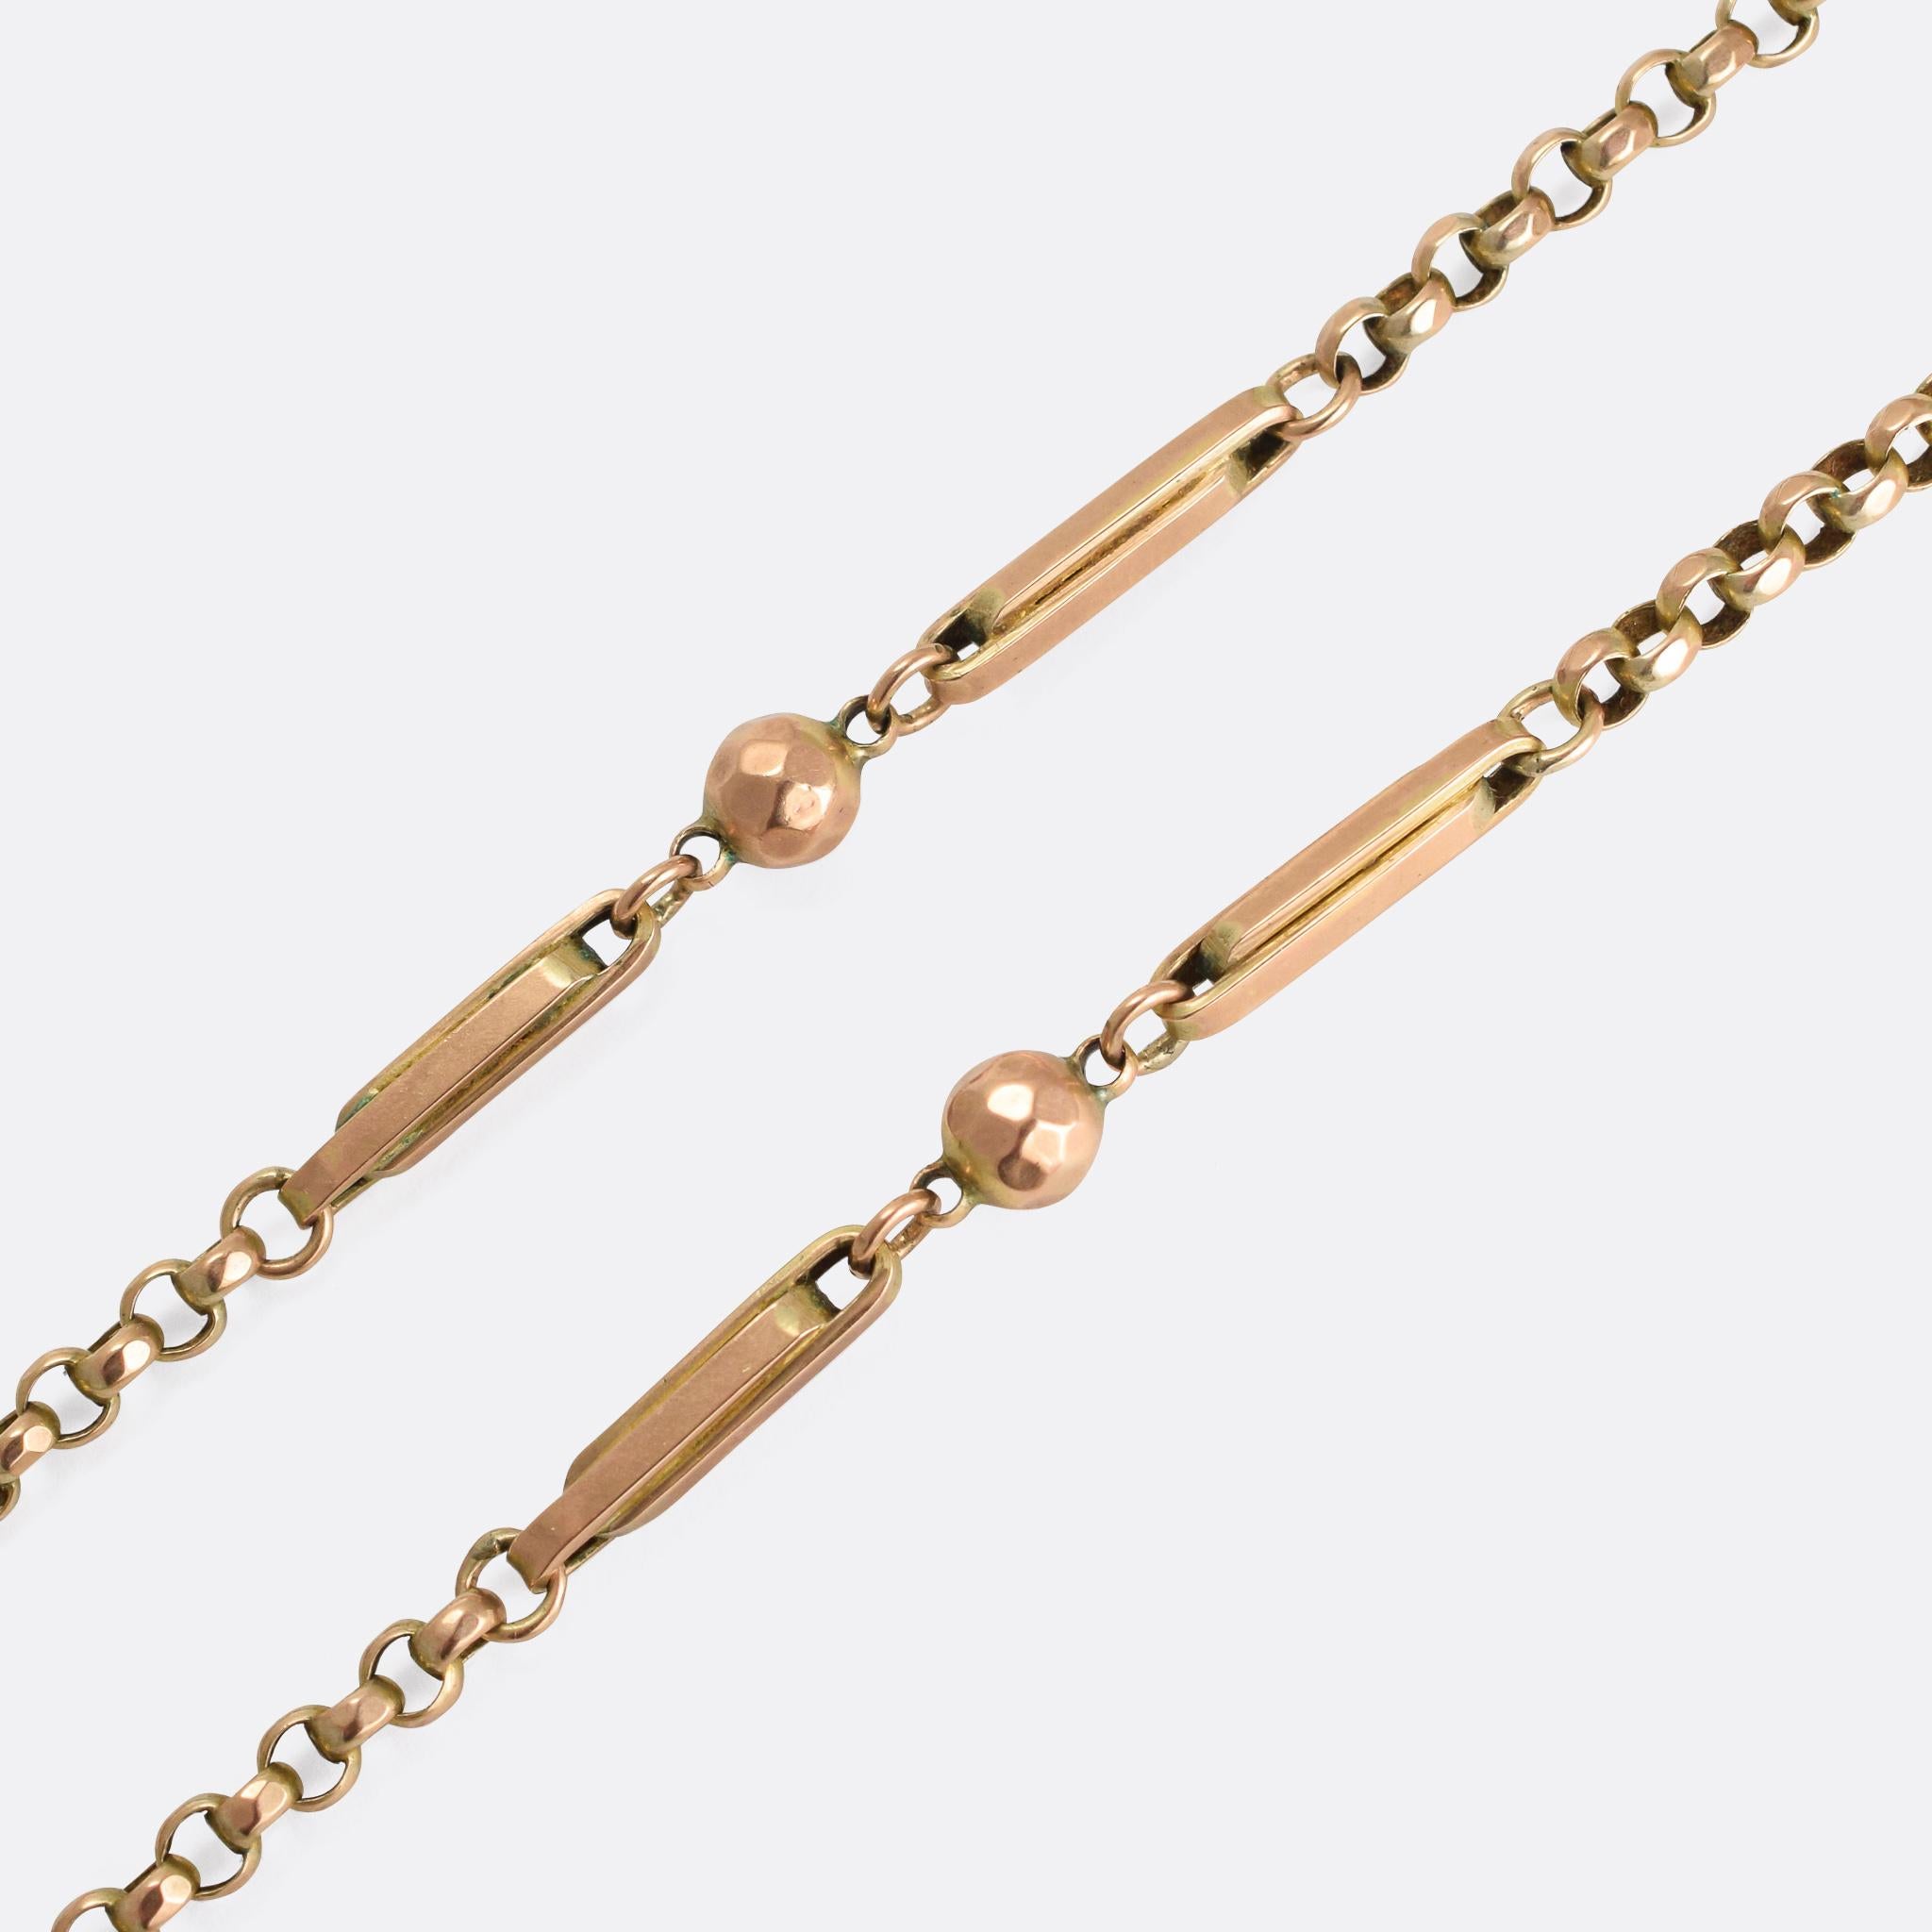 A fine gold fancy-link guard chain. It was made in the latter half of the 19th Century, and features elegant ball and bar embellishments to the faceted belcher links. It's just shy of 60 inches in length, and 32.6 grams of solid 9k